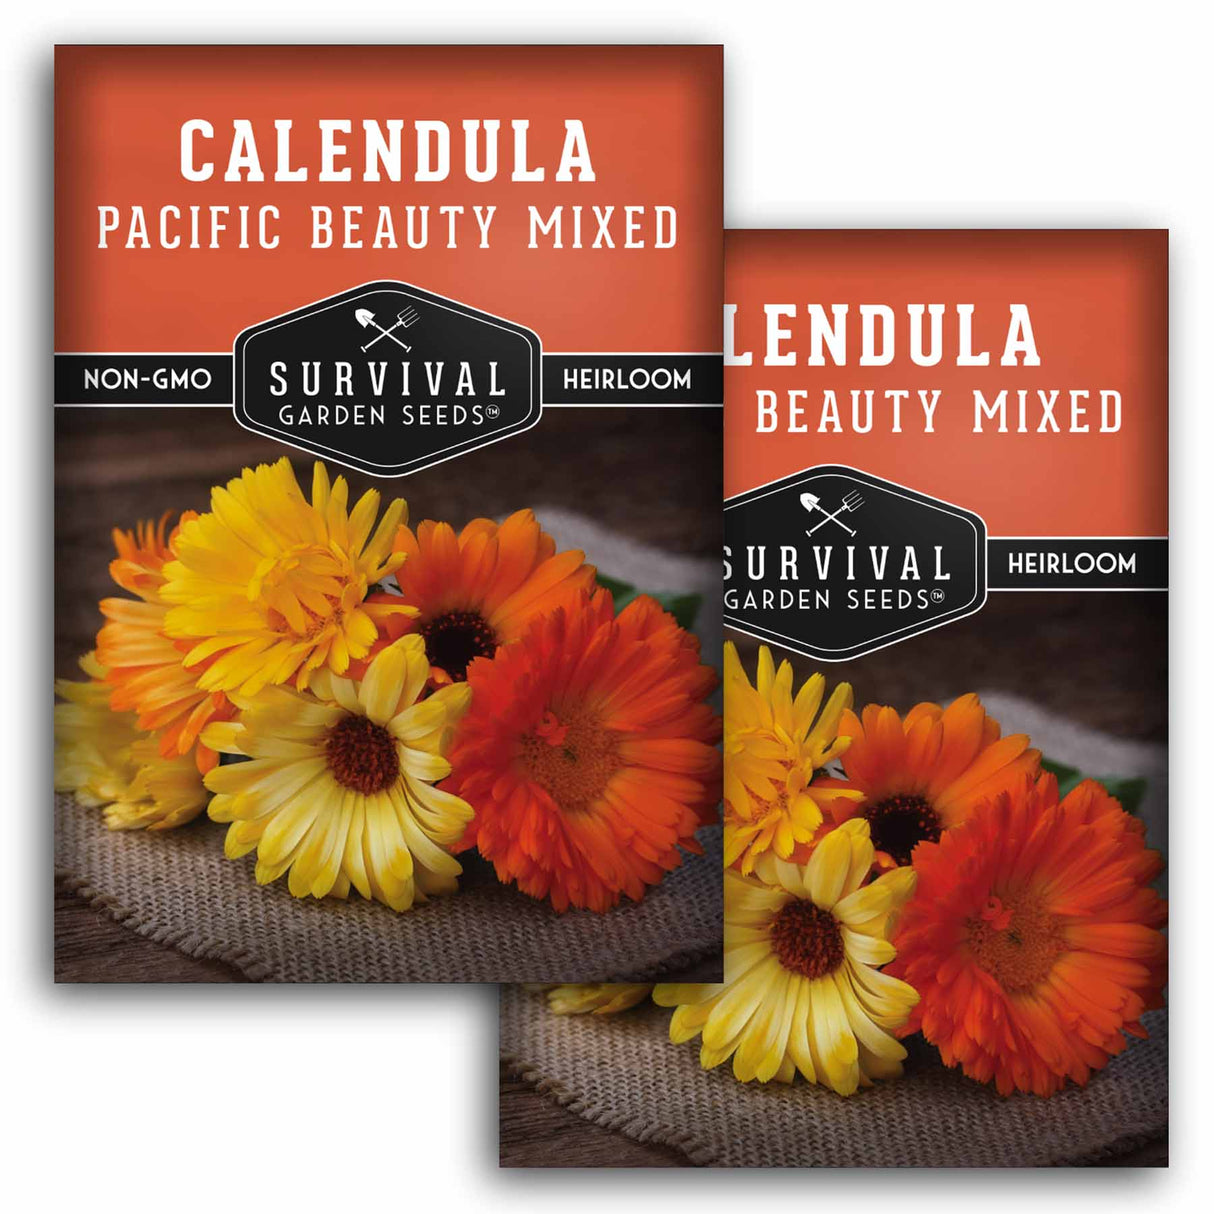 2 packets of Pacific Beauty Calendula seeds